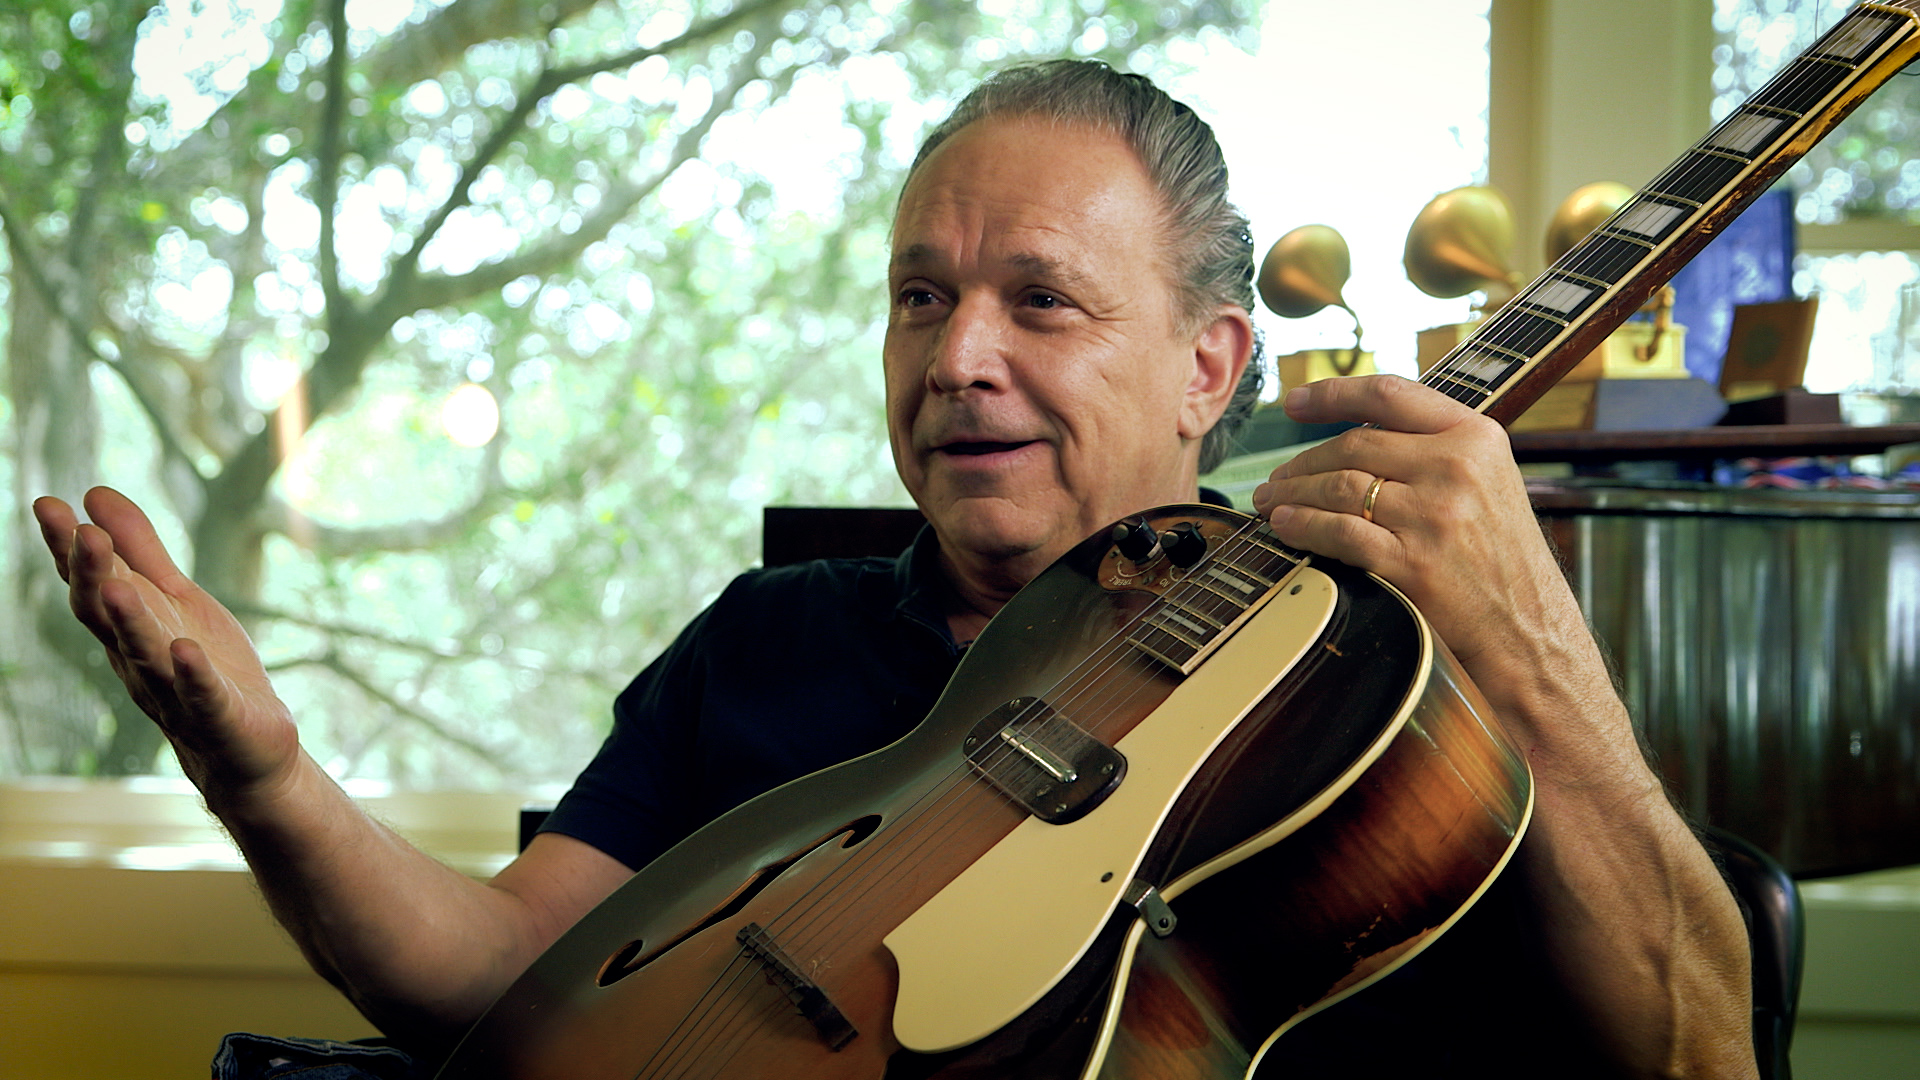 Wearing a black shirt, Jimmie Vaughan holds an acoustic guitar